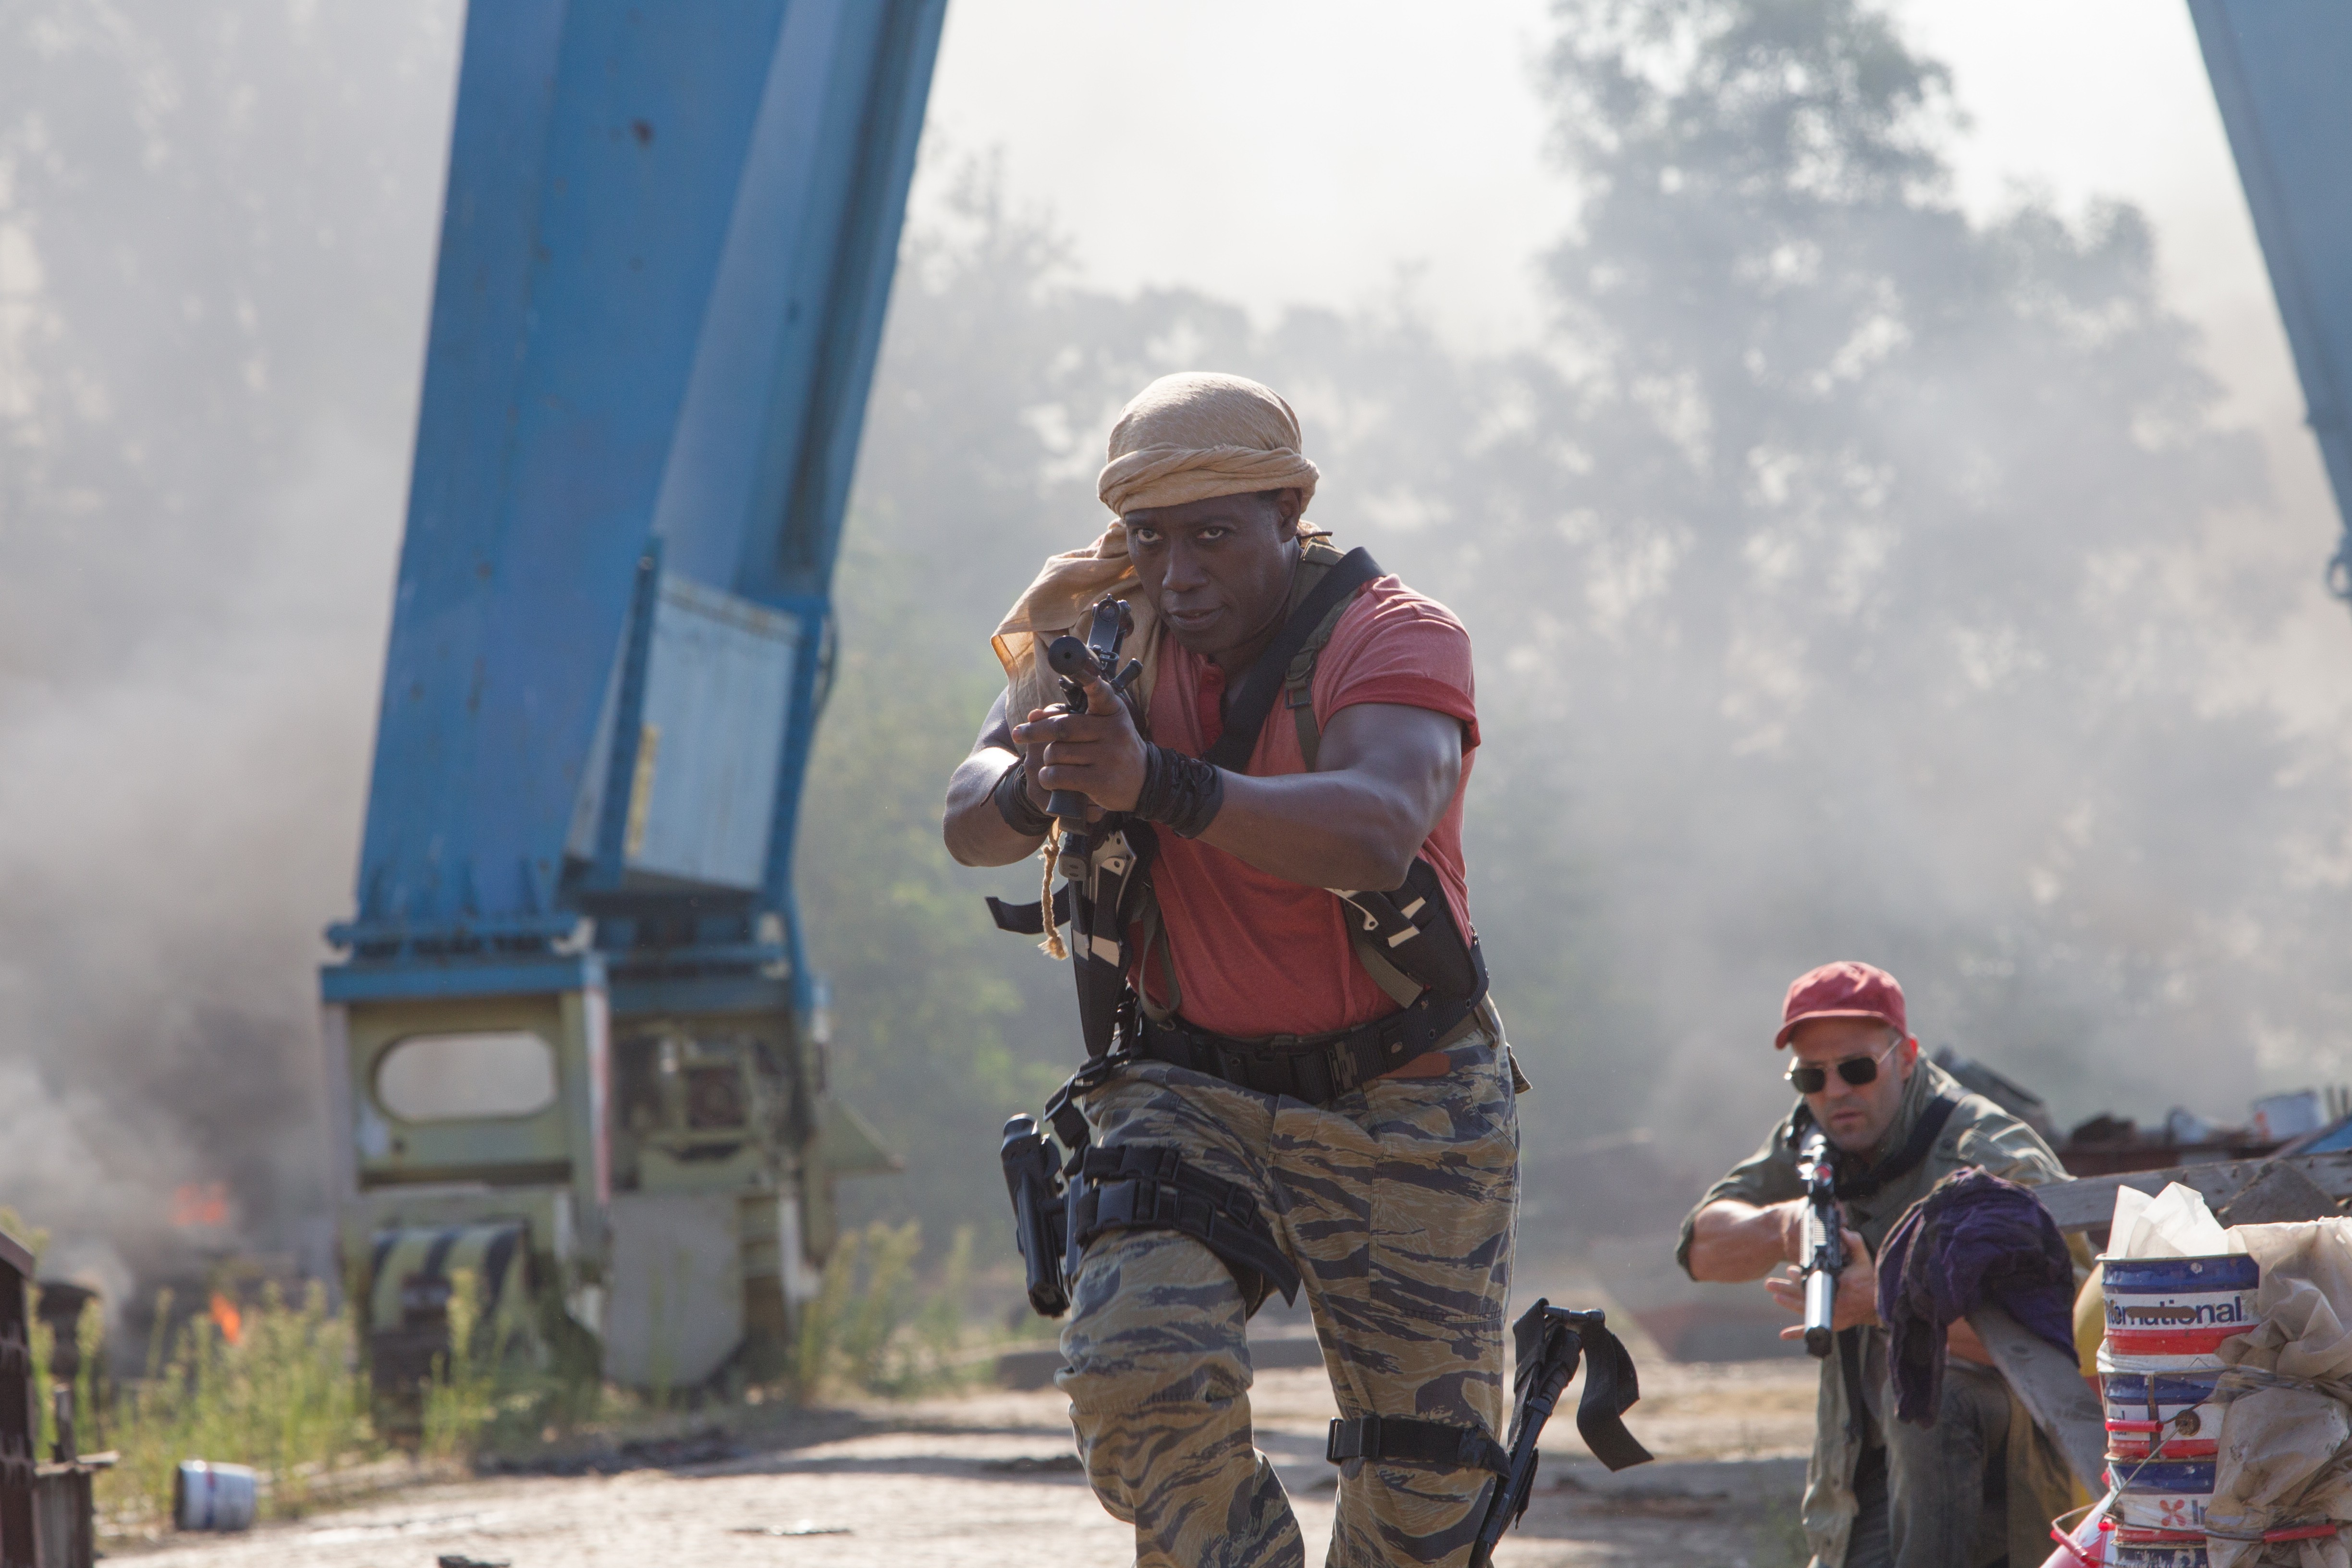 movie, the expendables 3, doc (the expendables), jason statham, lee christmas, wesley snipes, the expendables 8K